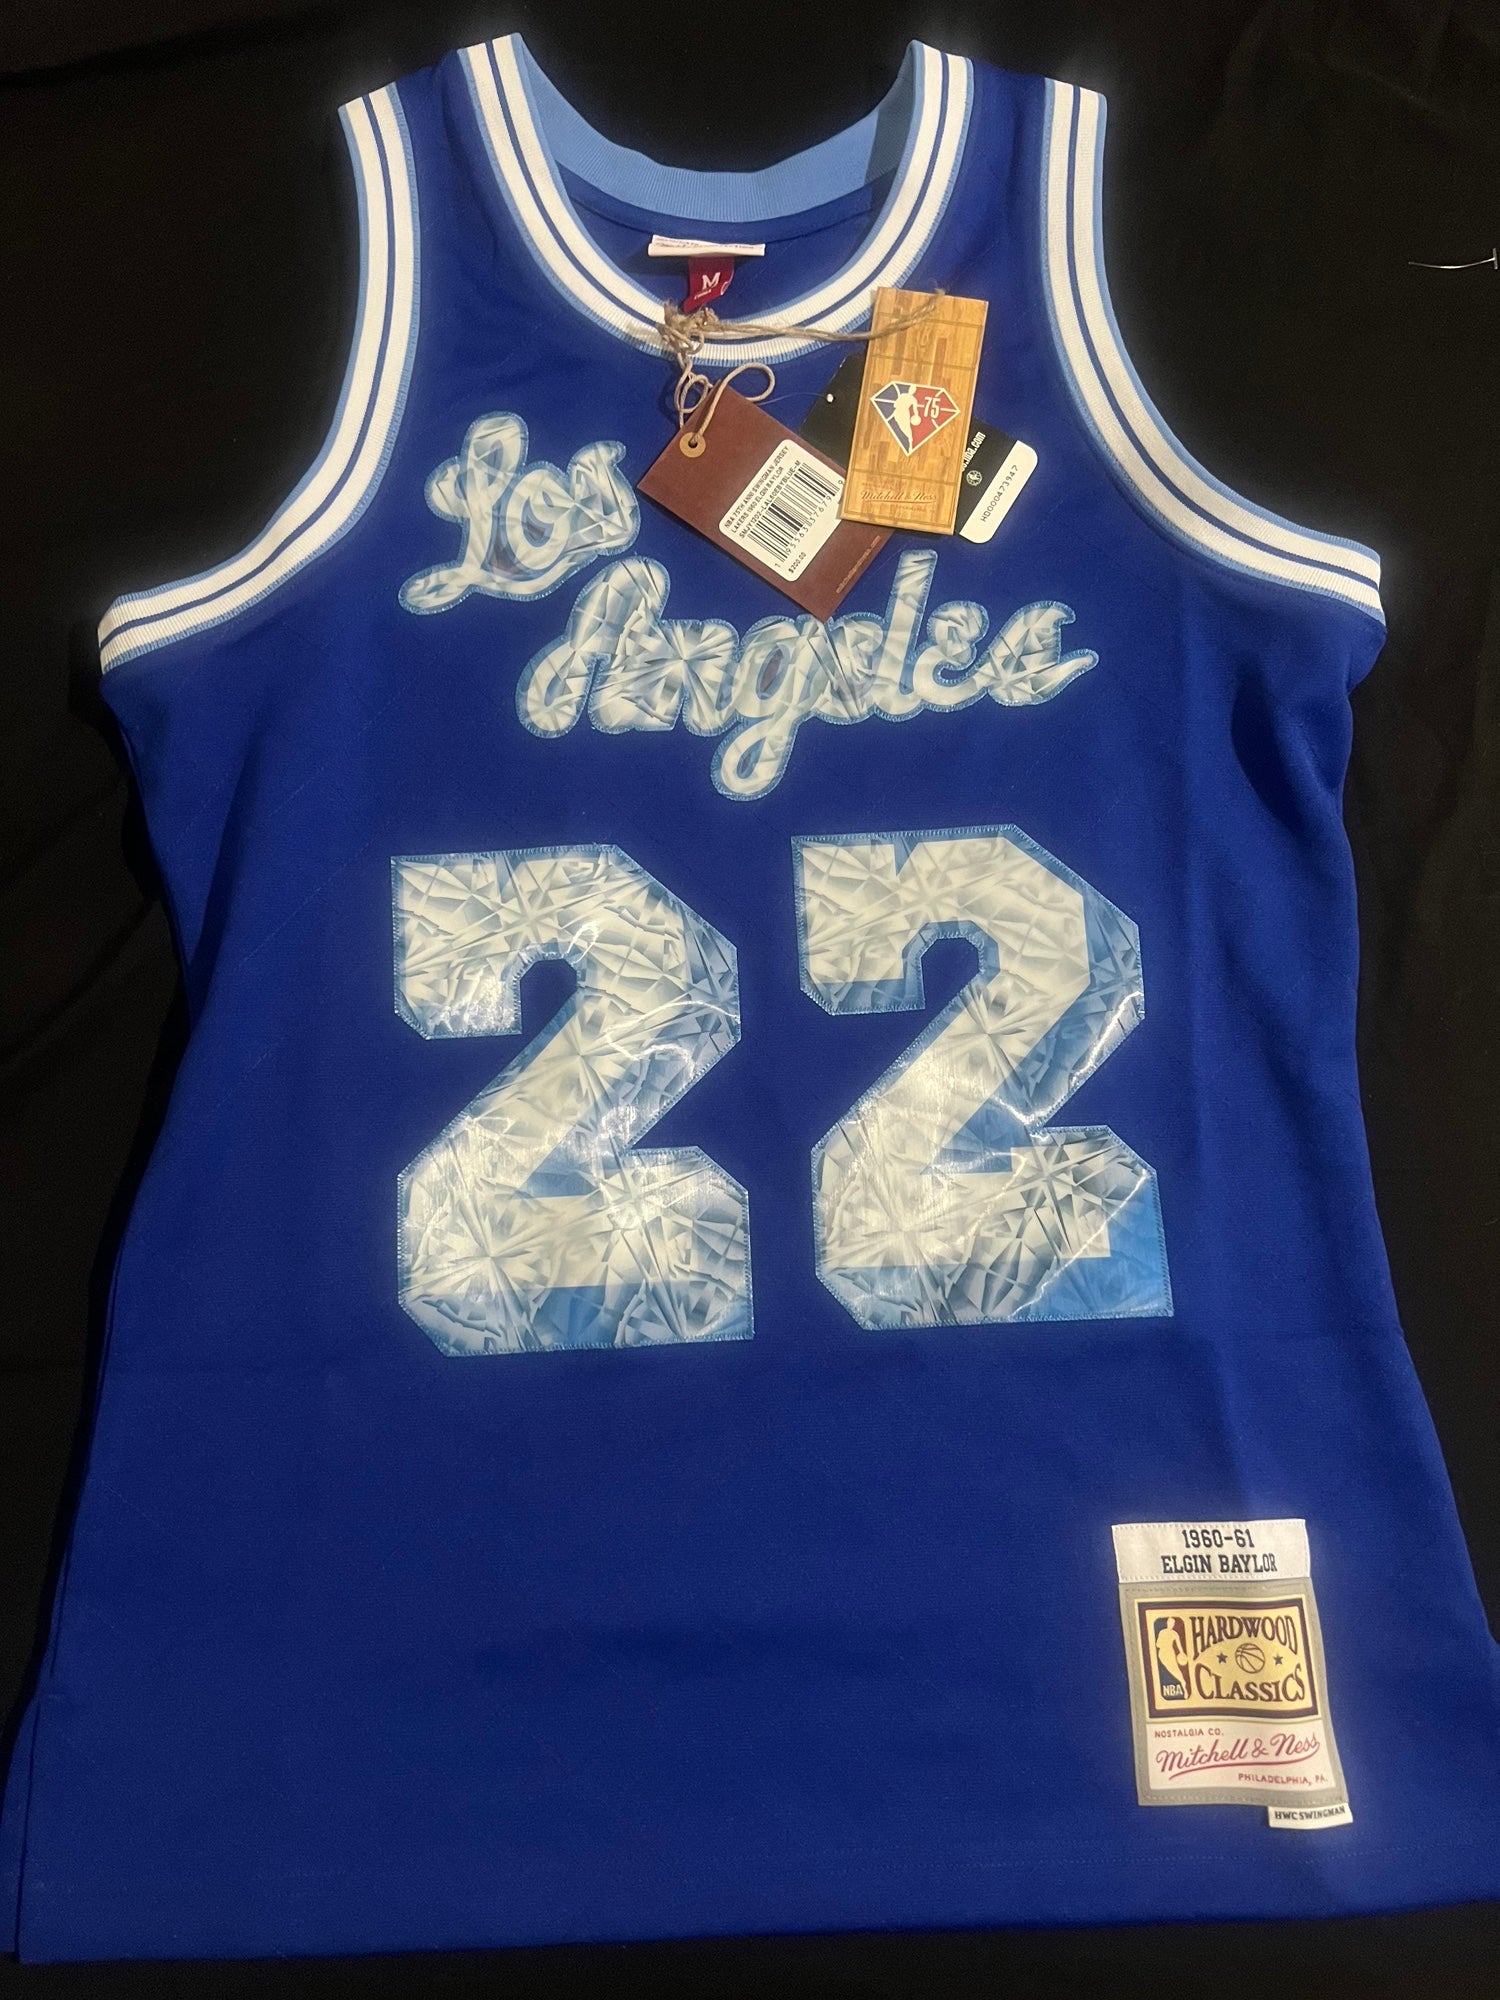 Mitchell & Ness Mens Lakers 75th Anniversary Jersey - Gold/Multi Size S